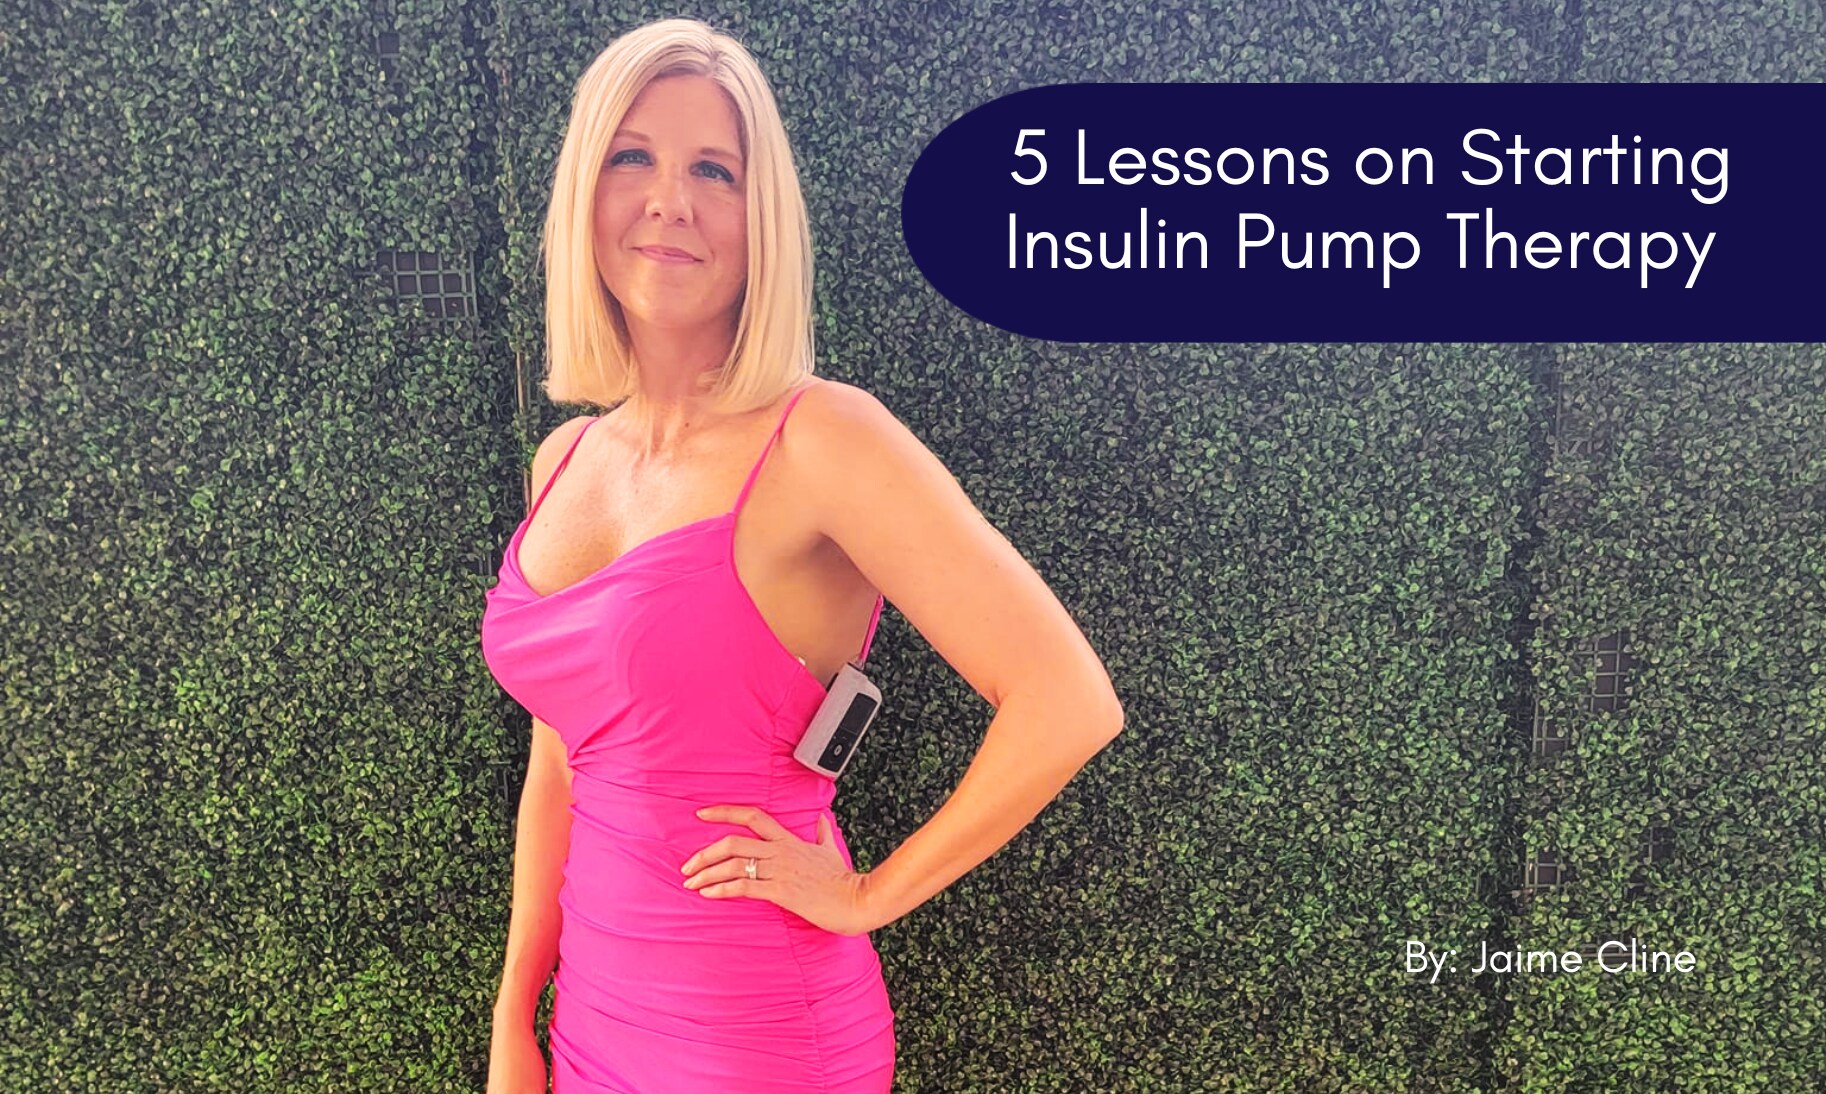 5 Lessons on Starting Insulin Pump Therapy